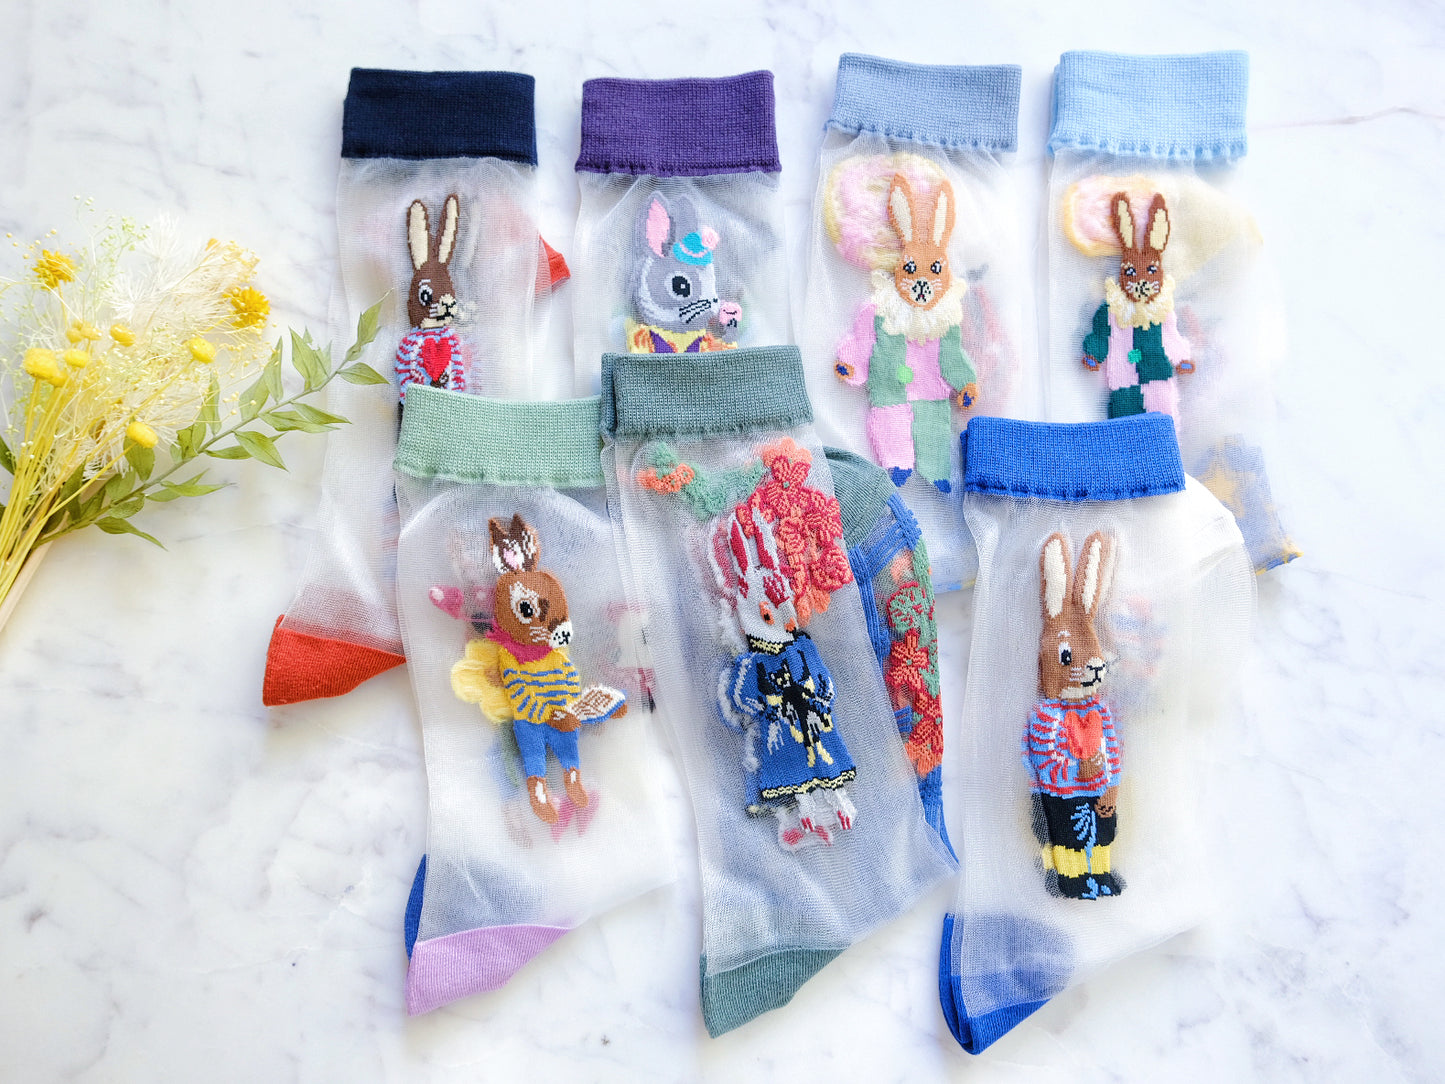 Miss June’s | Women’s Glass Silk-like Transparent socks | Cute | Colorful | Summer | Patterned | Gift Idea | Casual | Bunny lover | animal|